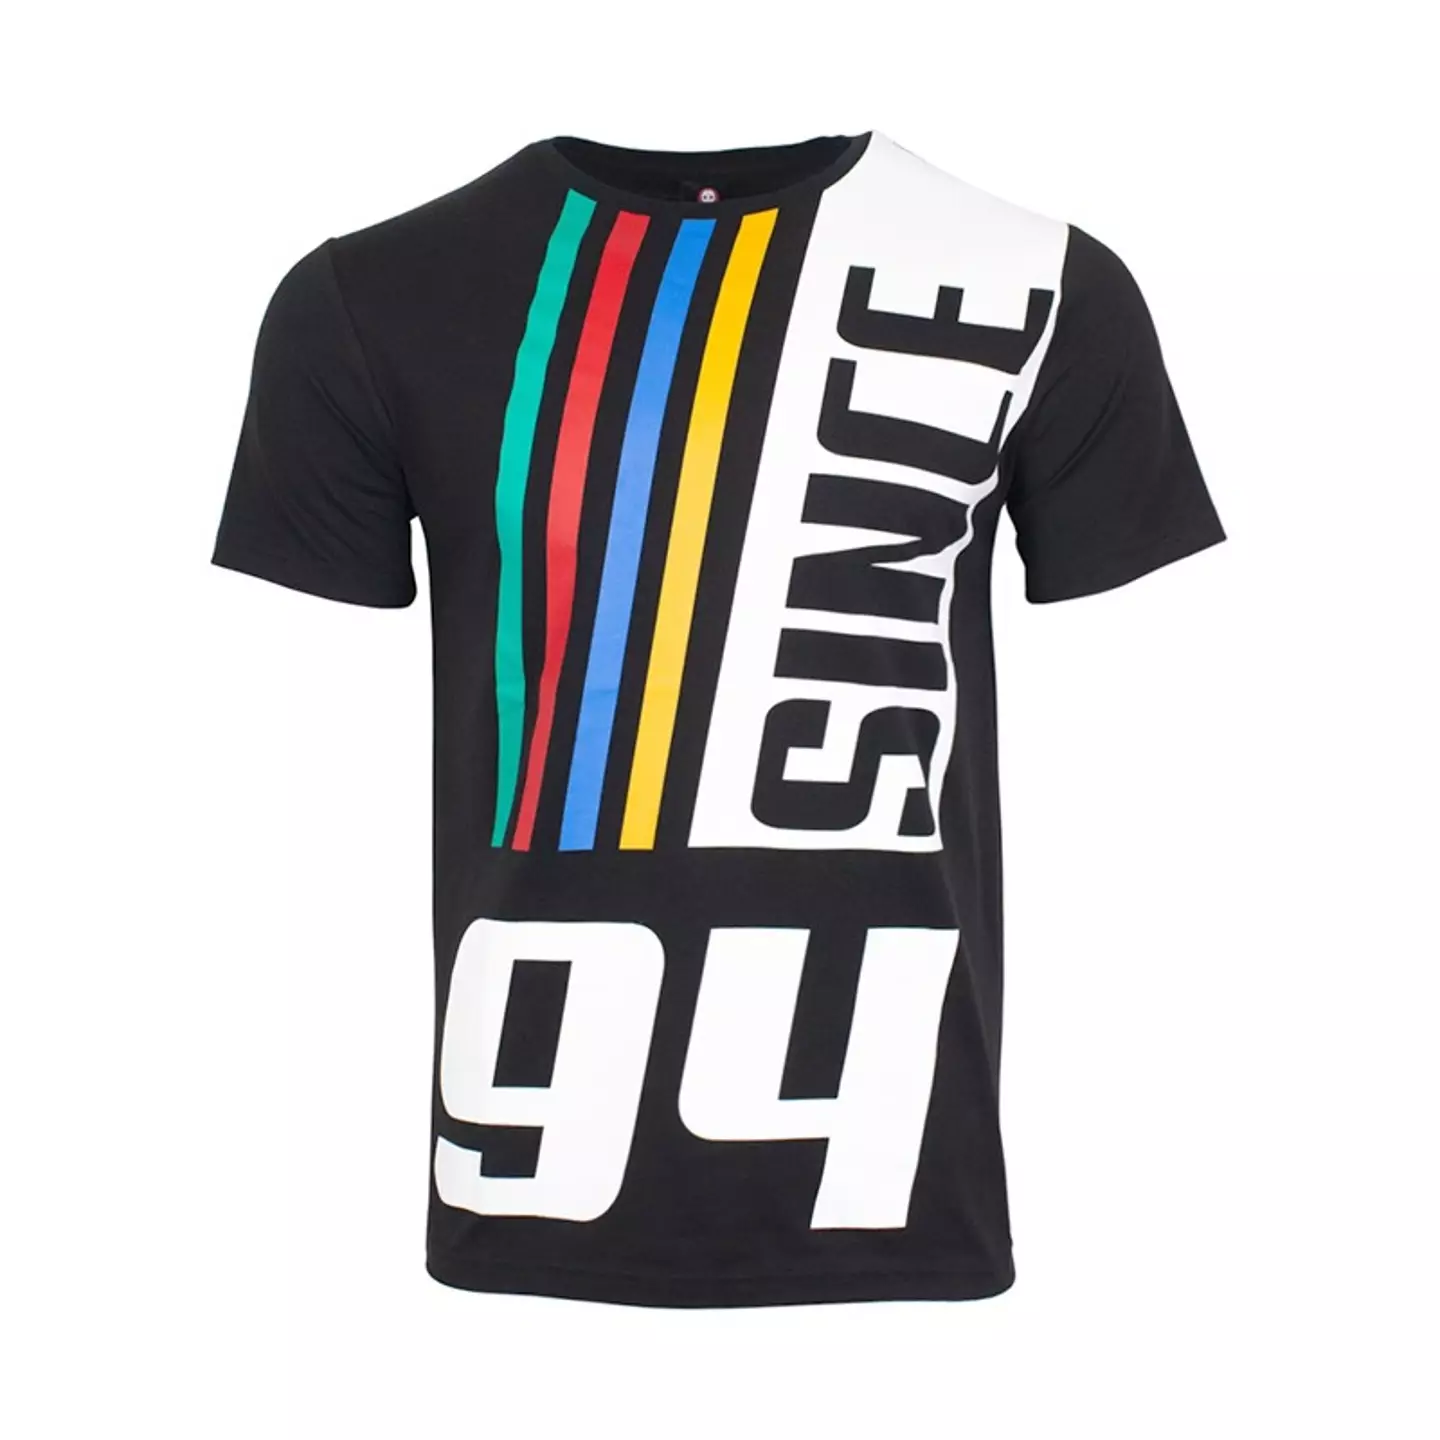 Official PlayStation ‘Since 94’ T-Shirt